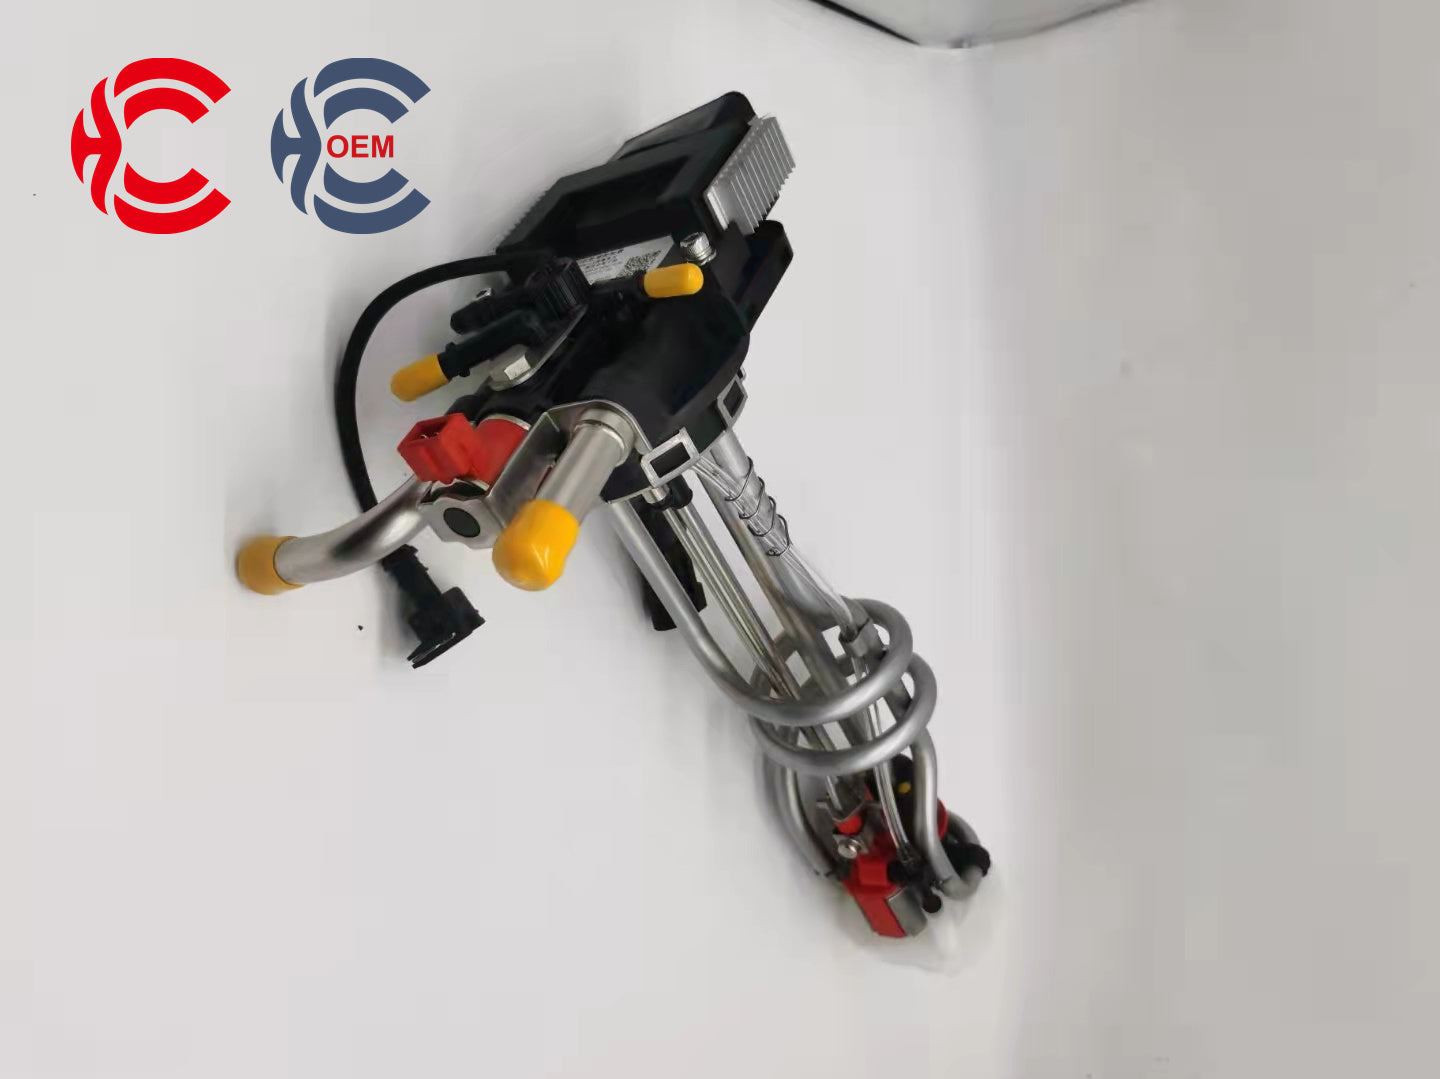 OEM: 3616070-EE0301Material: ABS metalColor: black silverOrigin: Made in ChinaWeight: 1000gPacking List: 1* Adblue Pump More ServiceWe can provide OEM Manufacturing serviceWe can Be your one-step solution for Auto PartsWe can provide technical scheme for you Feel Free to Contact Us, We will get back to you as soon as possible.